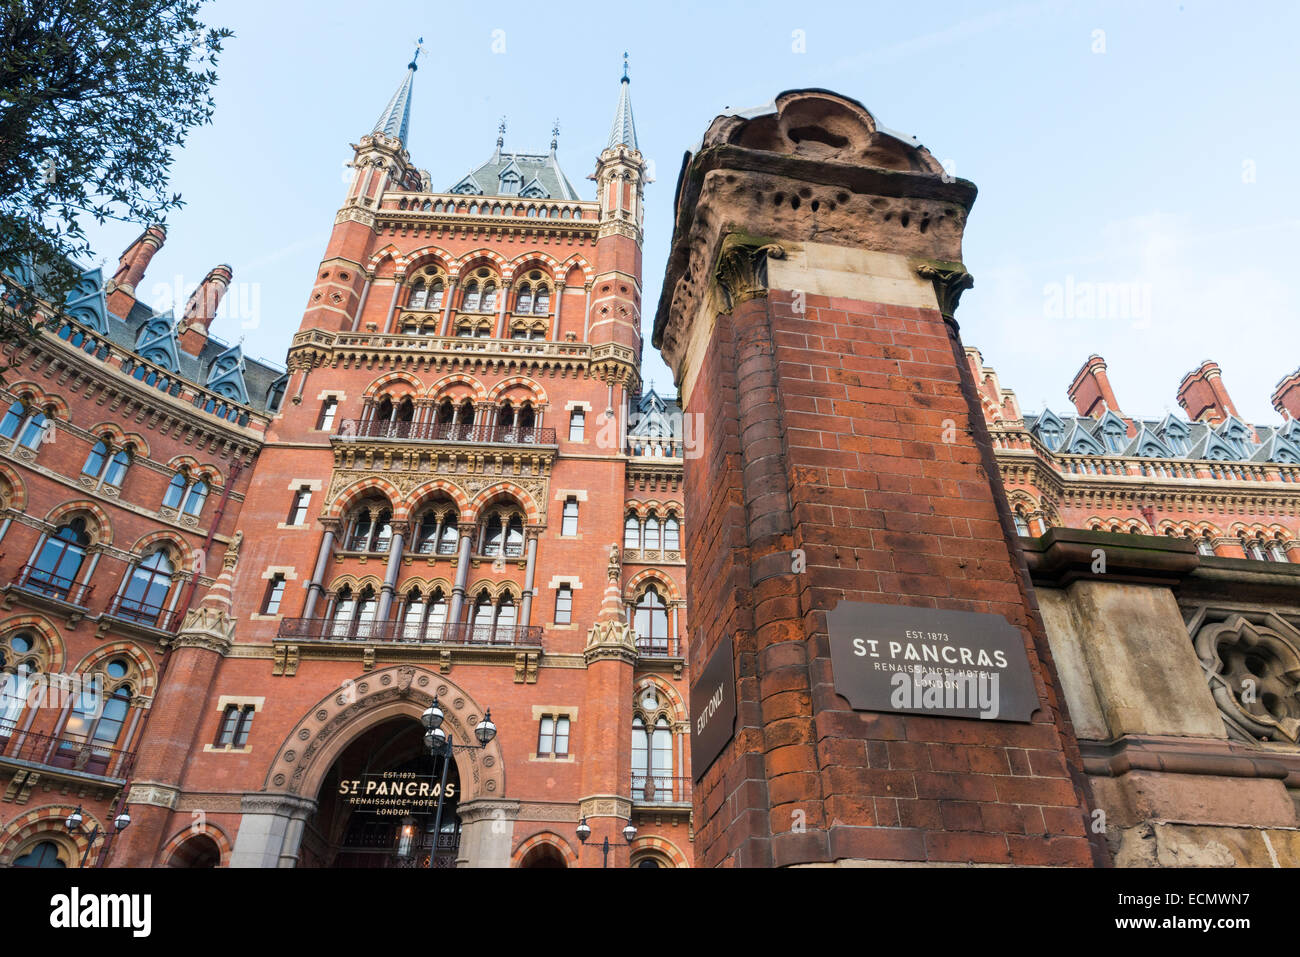 LONDON, UK - NOVEMBER 20: Facade of the St. Pancras Renaissance Hotel. November 20, 2014 in London. Formerly used as railway off Stock Photo